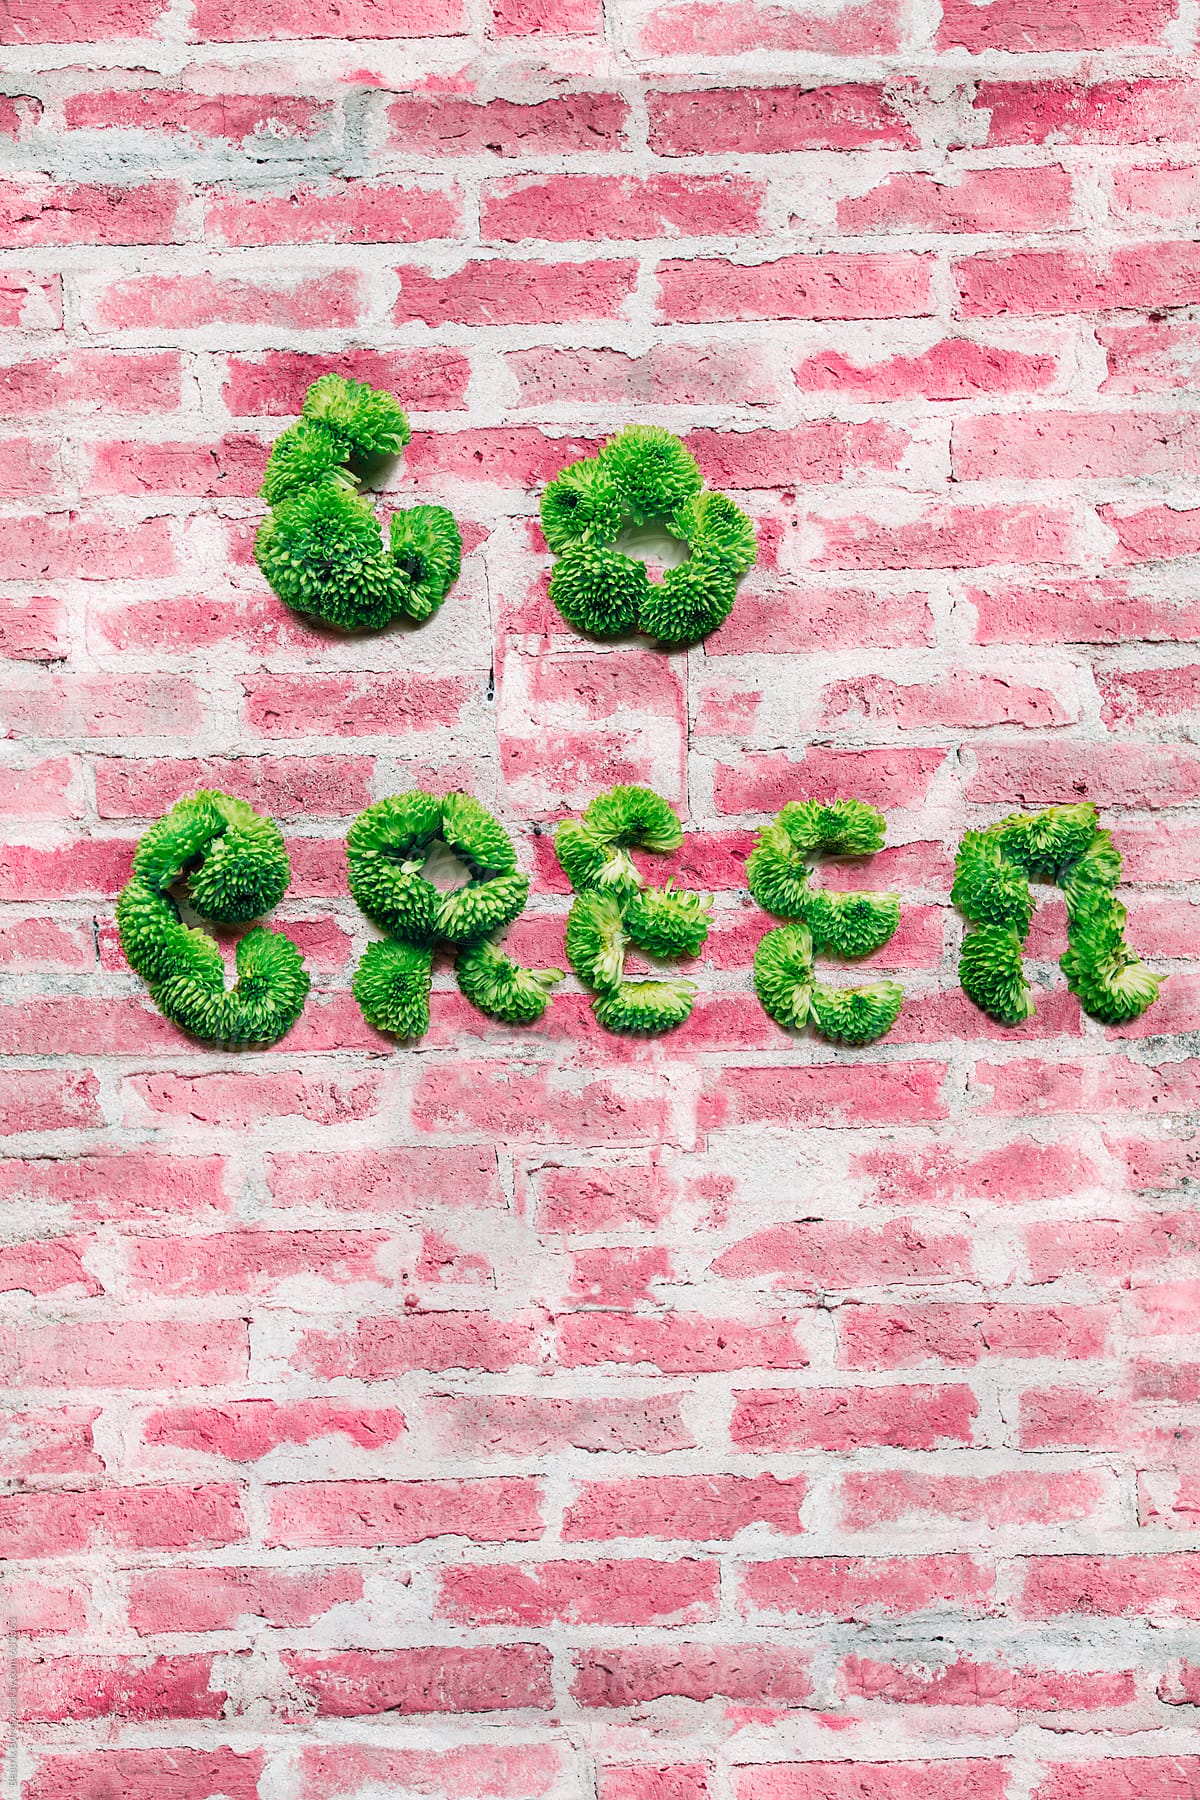 Go green message written by green plant on a pink brick wall